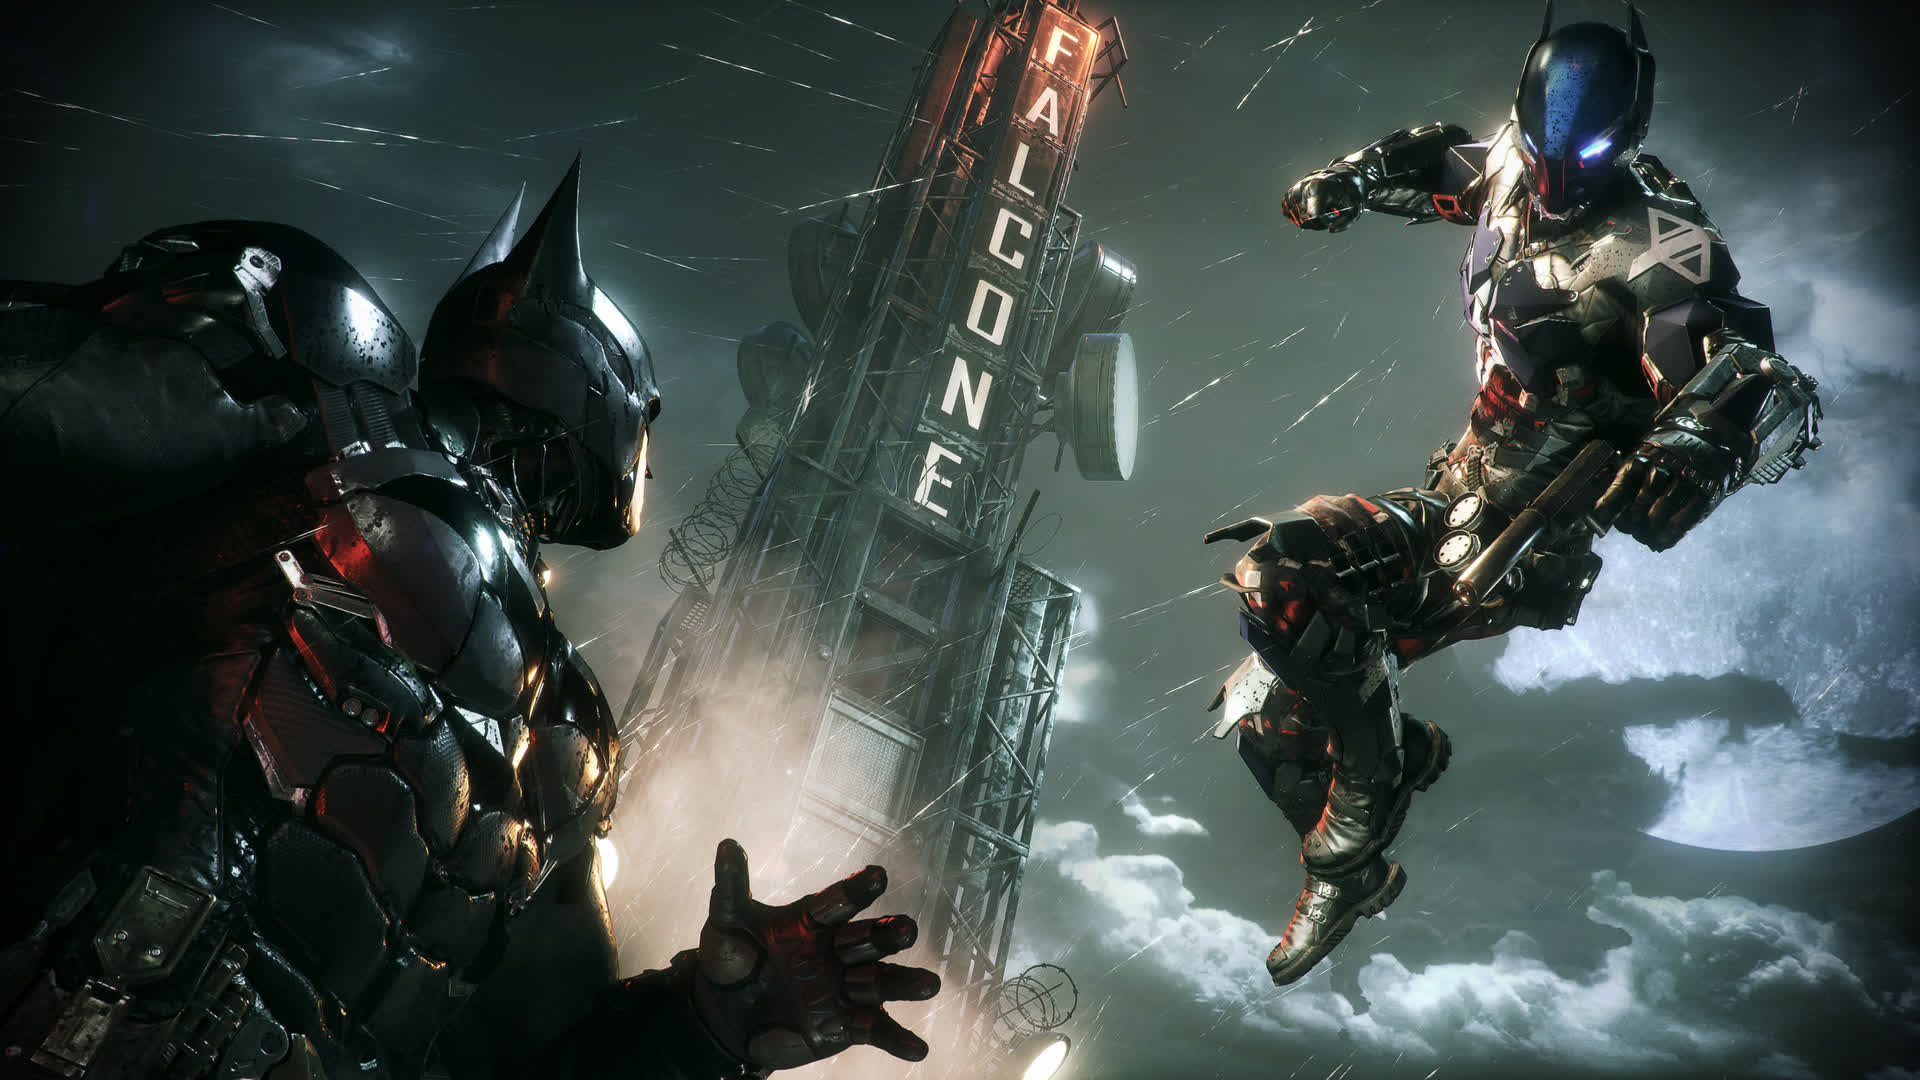 AT&T lets you play Batman: Arkham Knight for free through white-labeled Stadia partnership